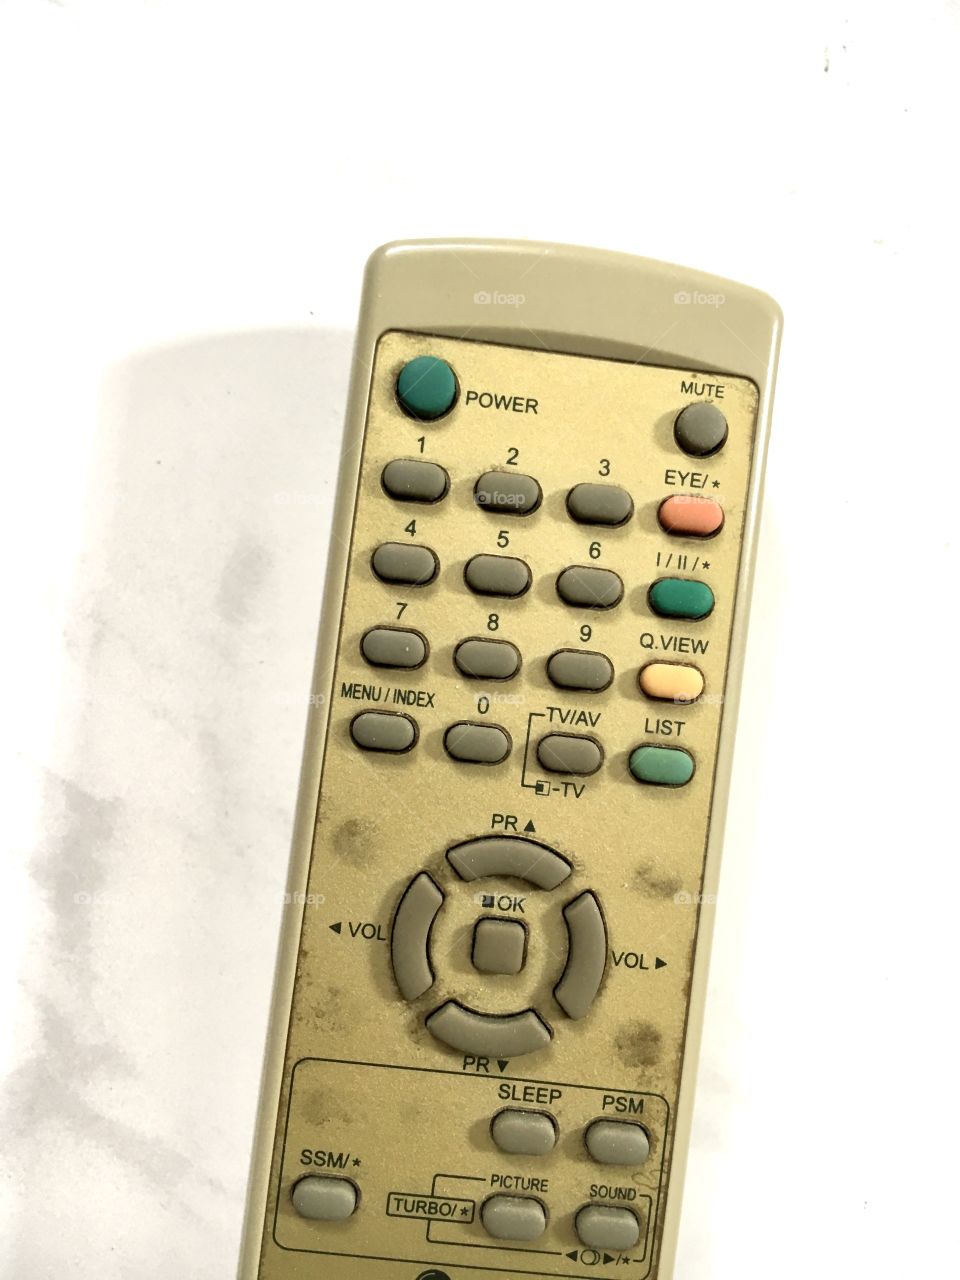 The old remote